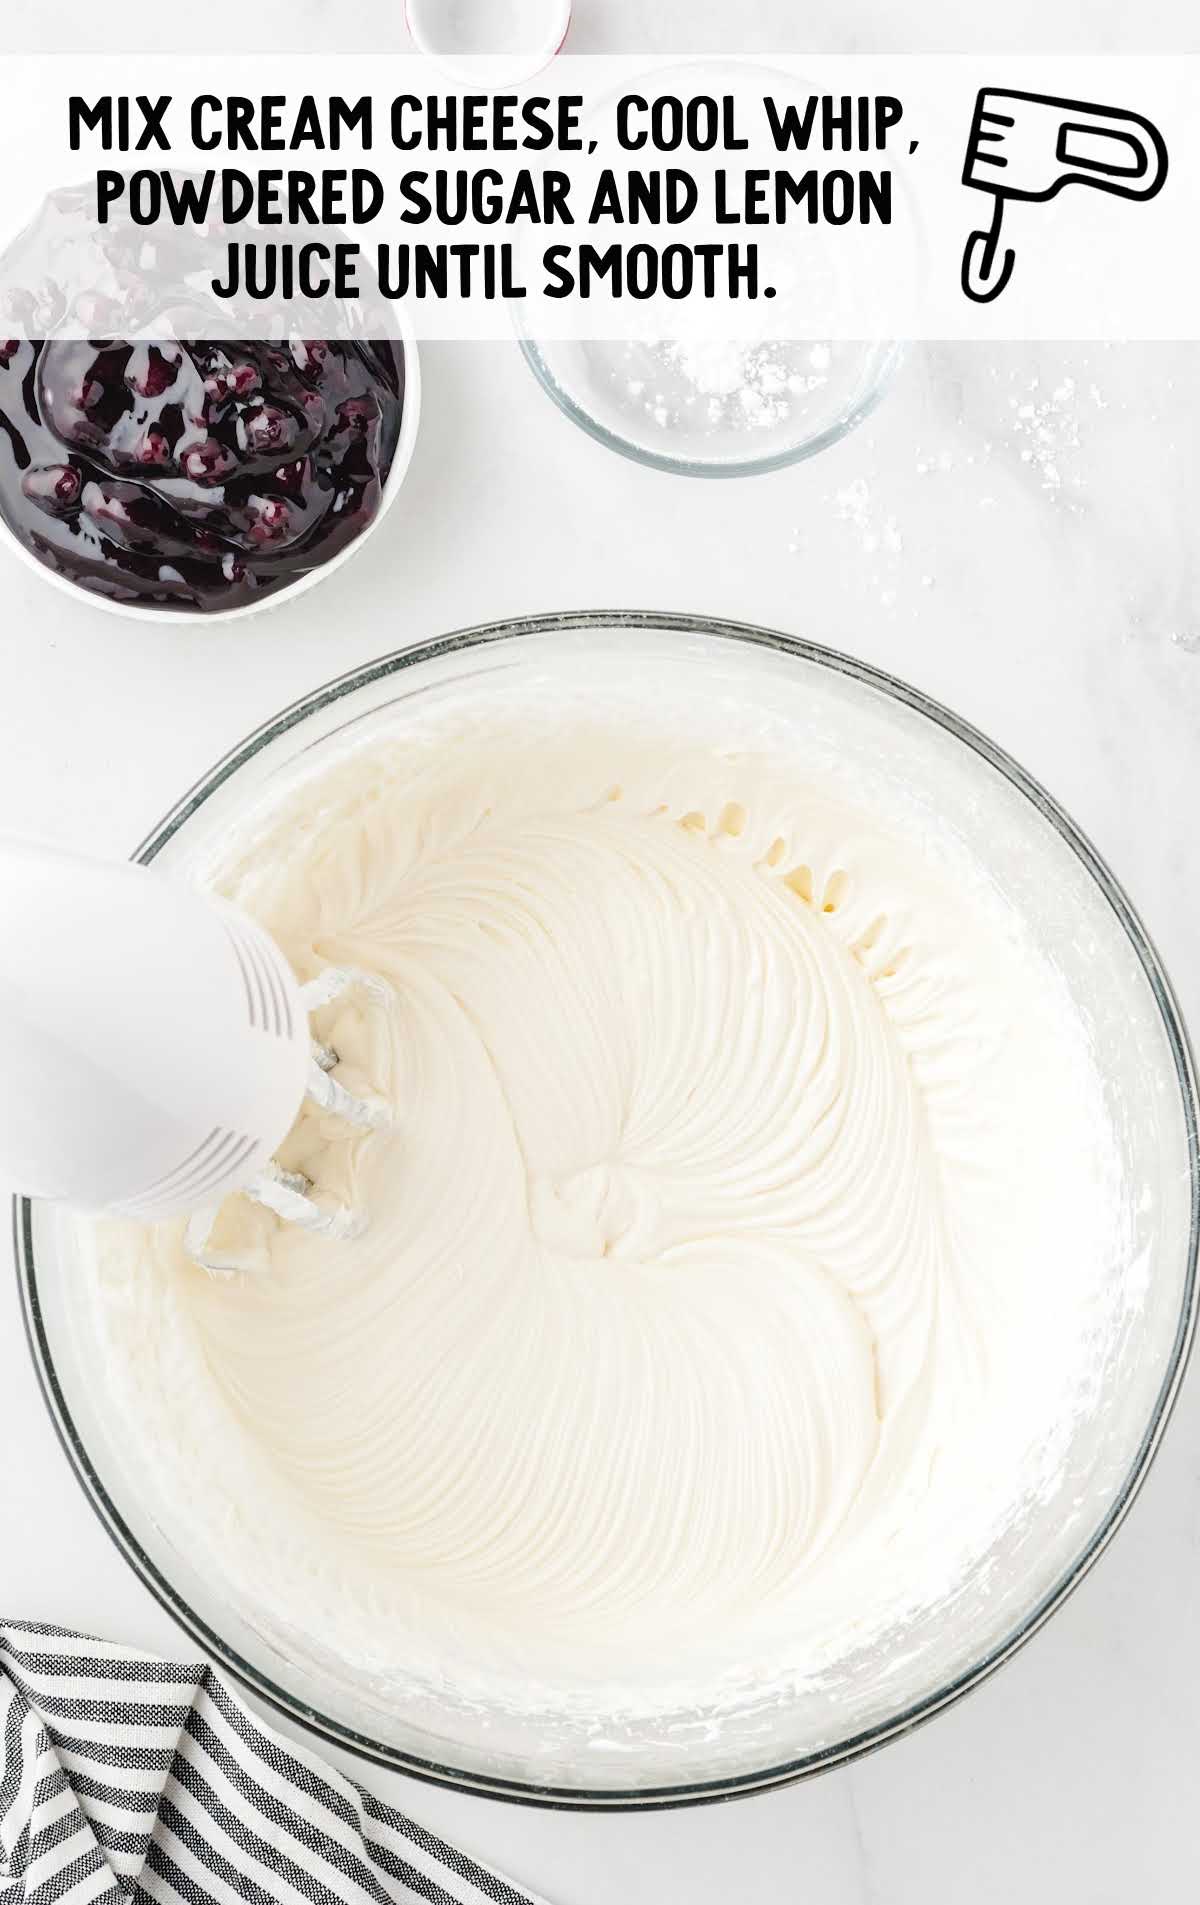 No Bake Blueberry Cheesecake process shot of ingredients being blended together in a bowl